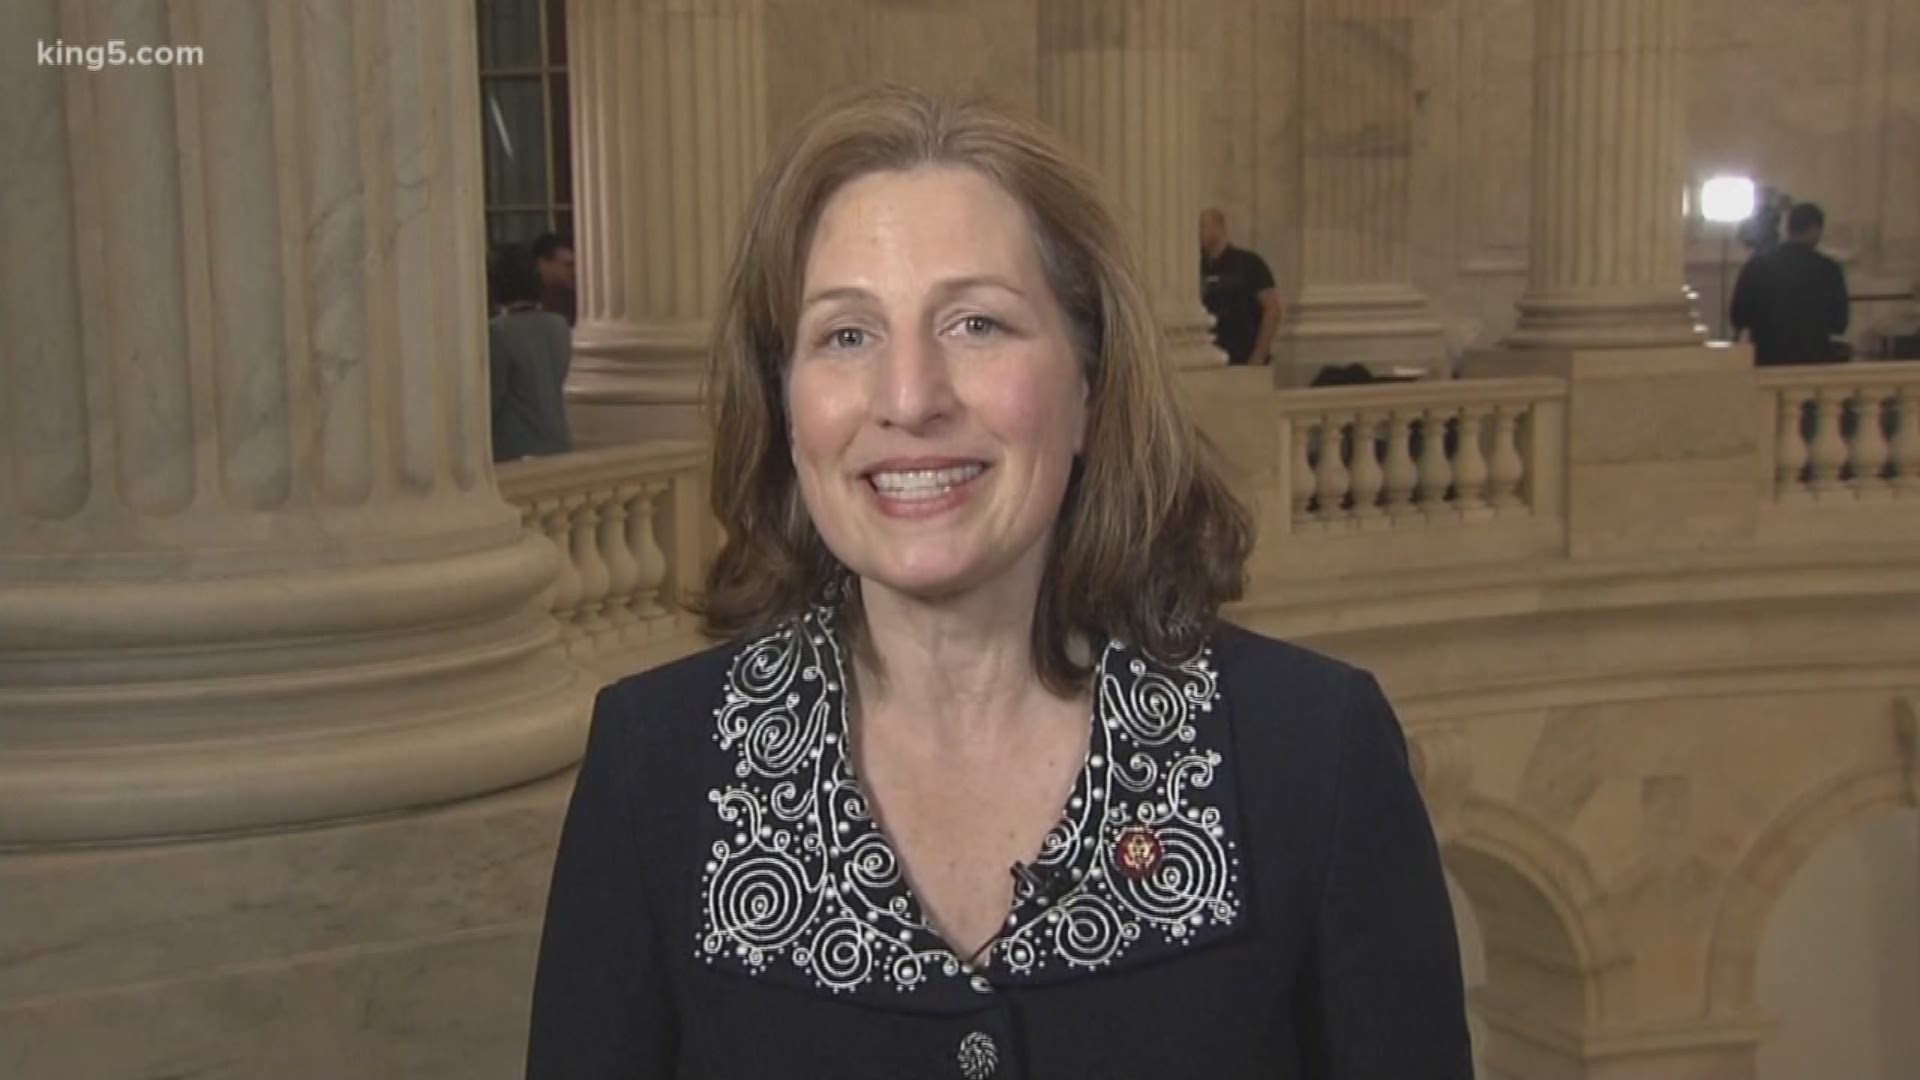 Washington Congresswoman Kim Schrier, who represents the state’s 8th Congressional District, was part of the new class that was sworn in Thursday.